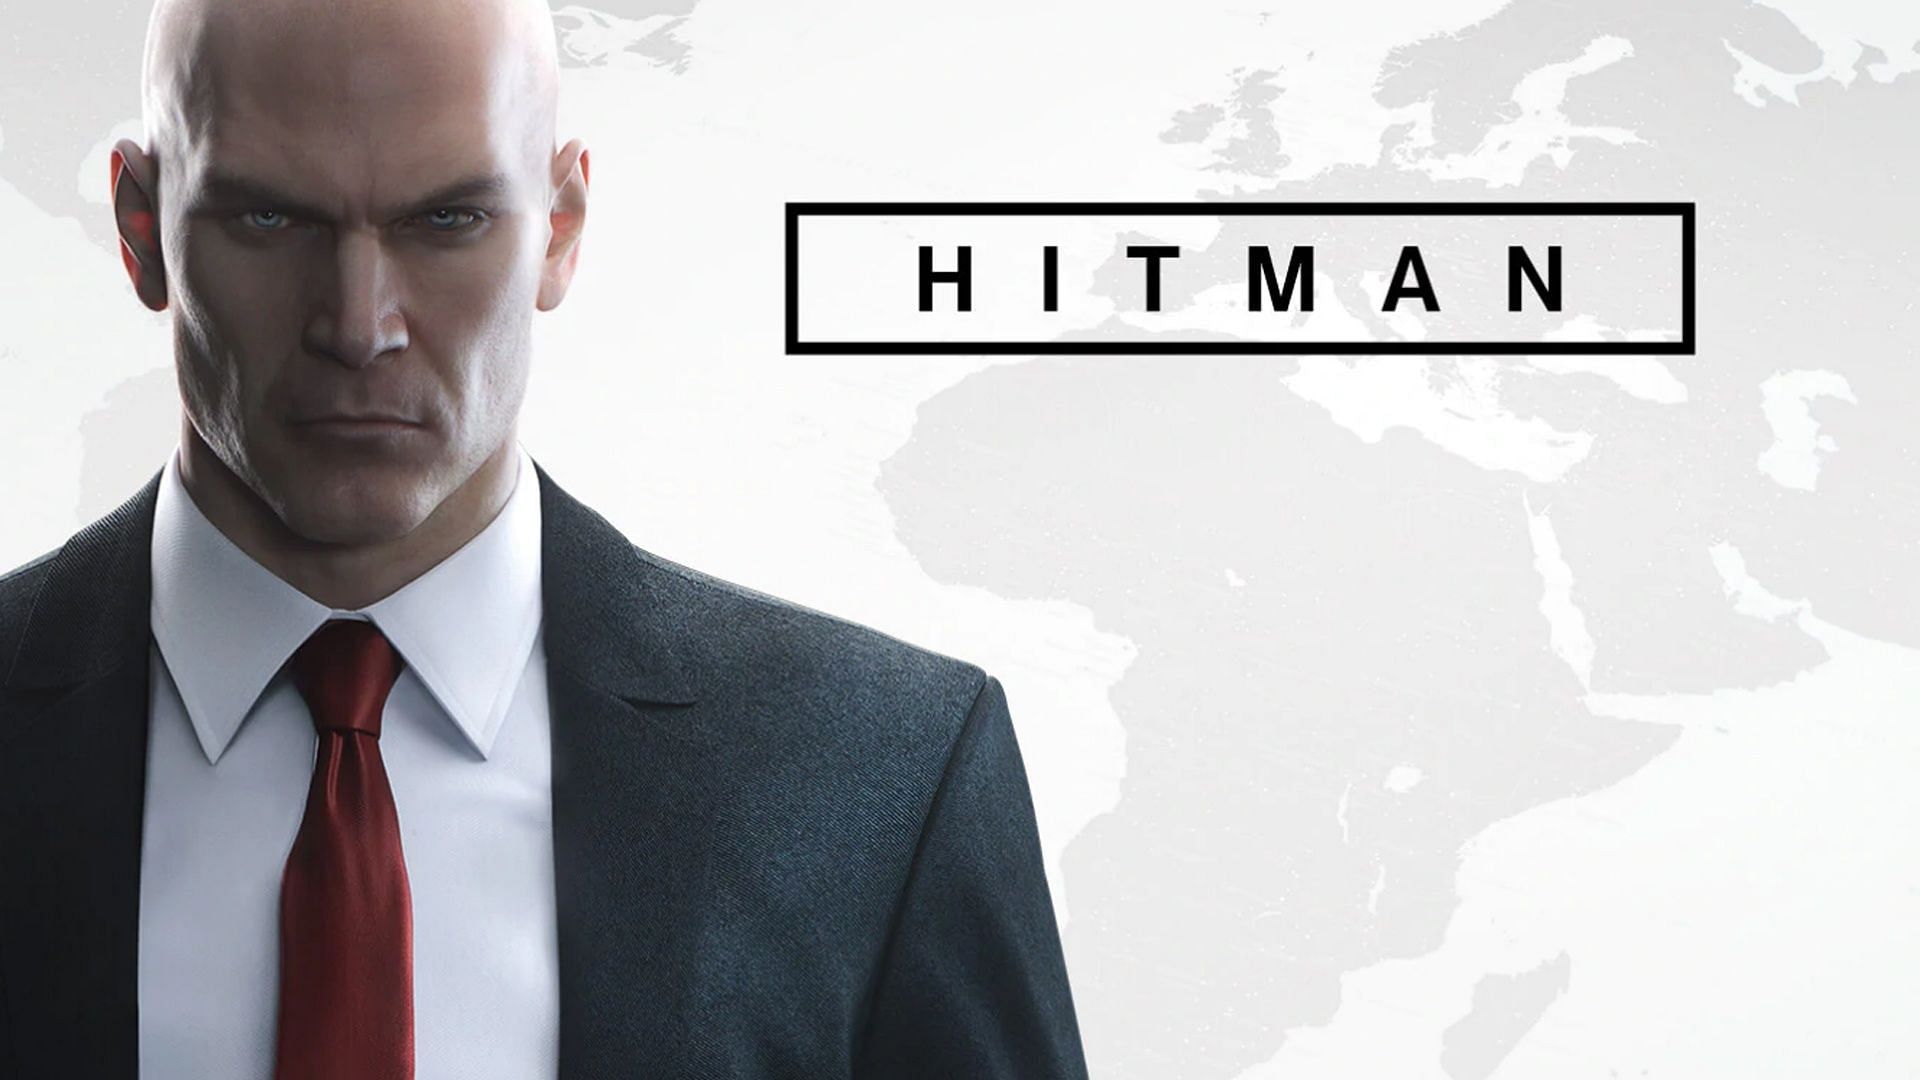 Hitman is a video game franchise by developer IO Interactive (Image via IO Interactive)